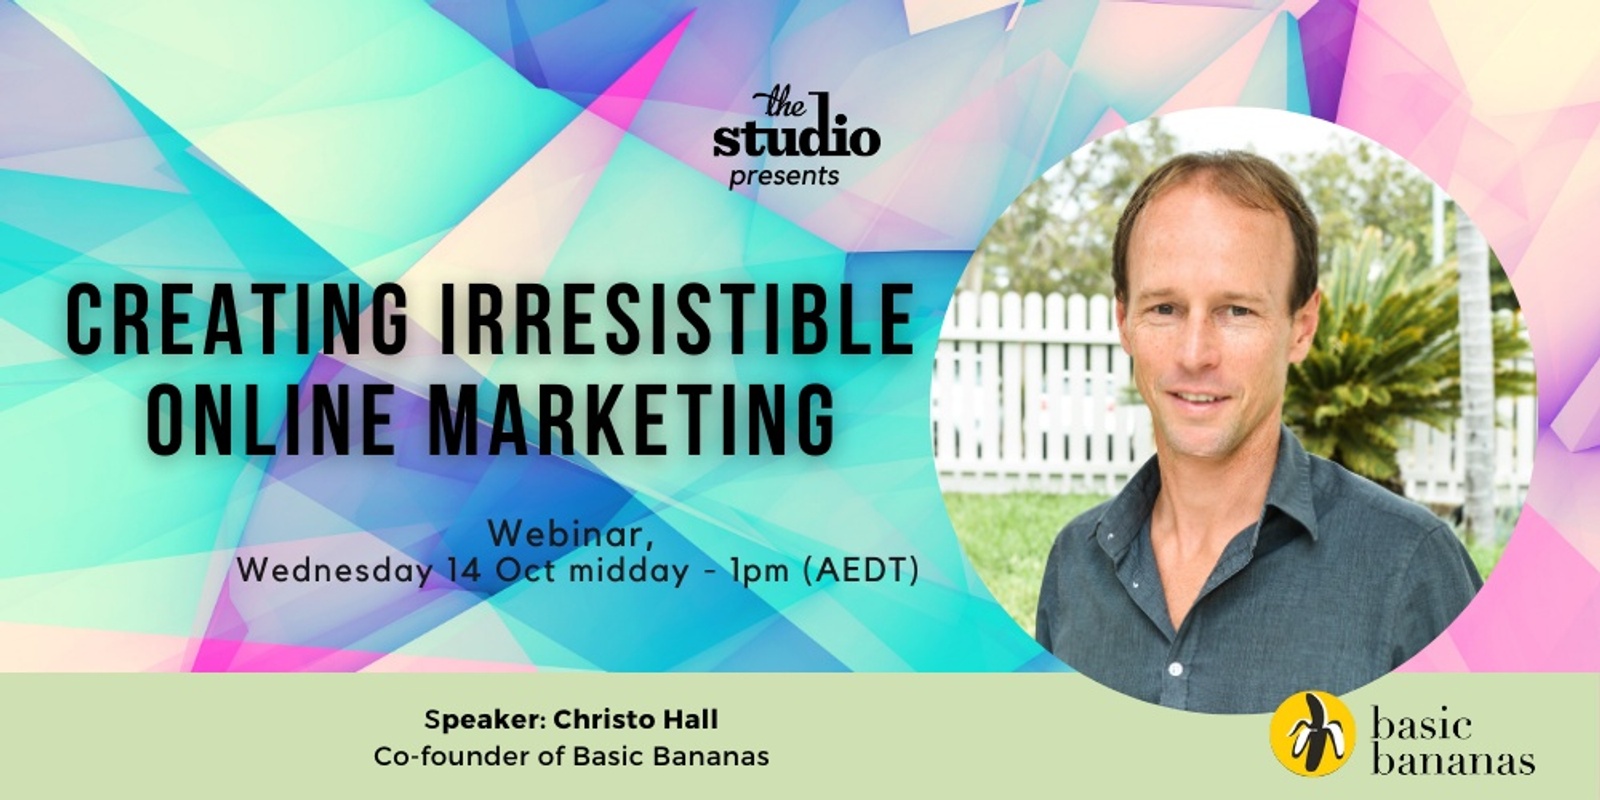 Banner image for Creating Irresistible Online Marketing | Wed 14 Oct midday - 1pm